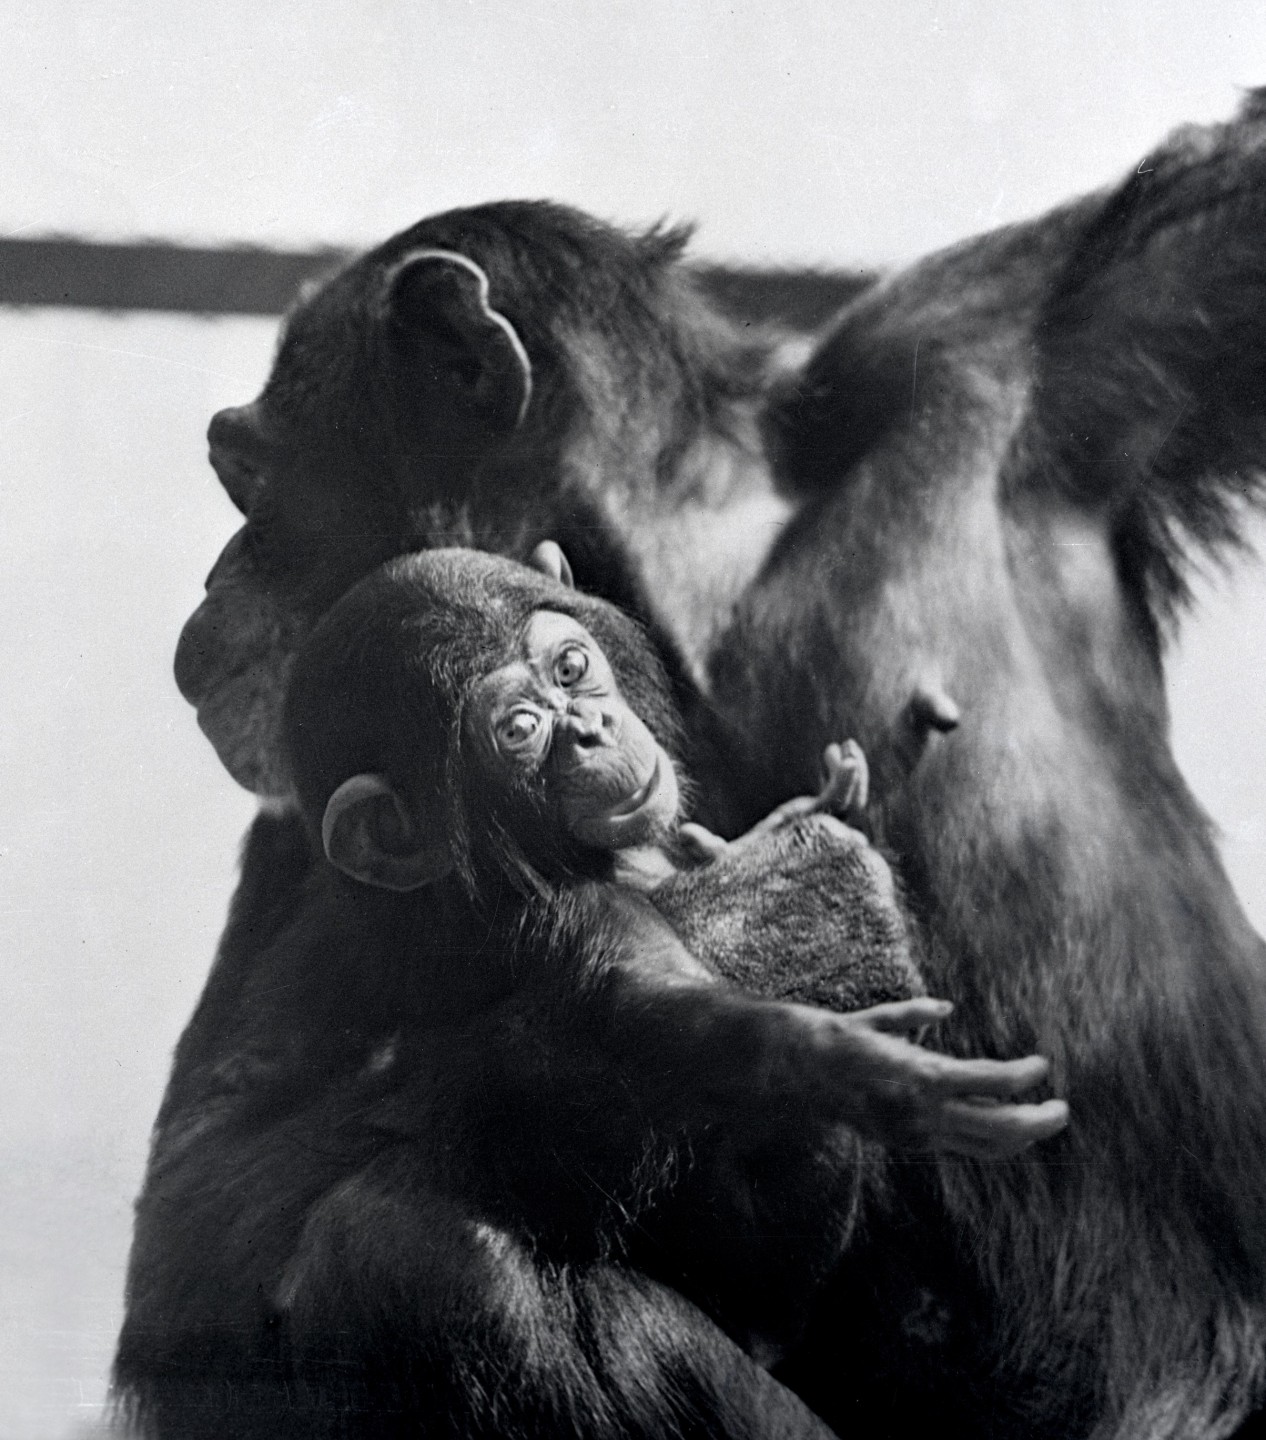 The Zoo's first chimpanzee birth took place on February 22, George Washington's birthday—so, of course, Katie's son was named George.